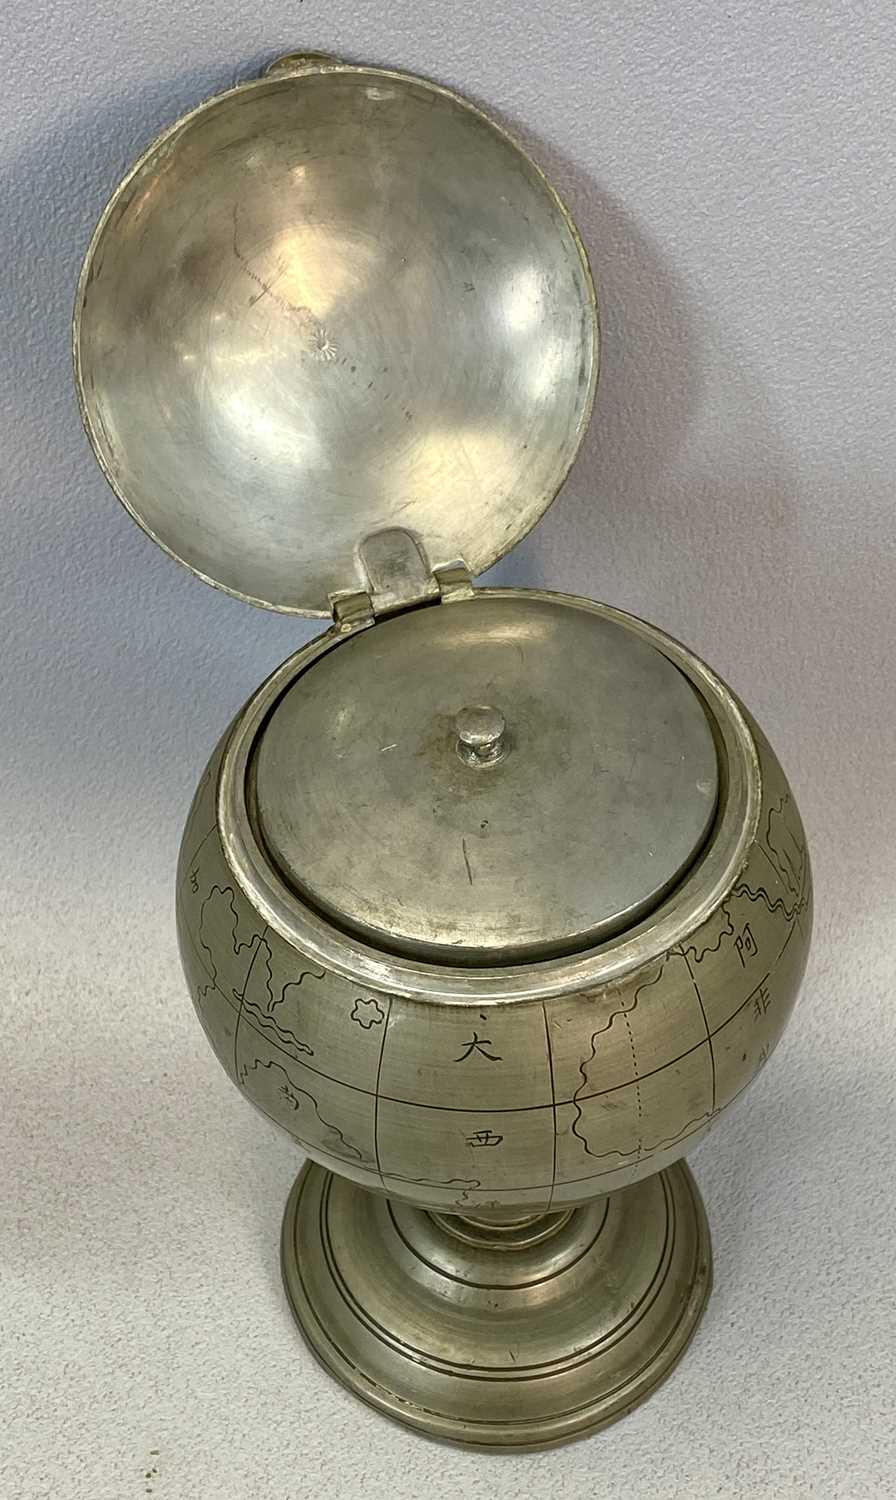 CHINESE PEWTER GLOBE SHAPED PEDESTAL TOBACCO JAR, early 20th century, hinged cover, interior - Image 5 of 5